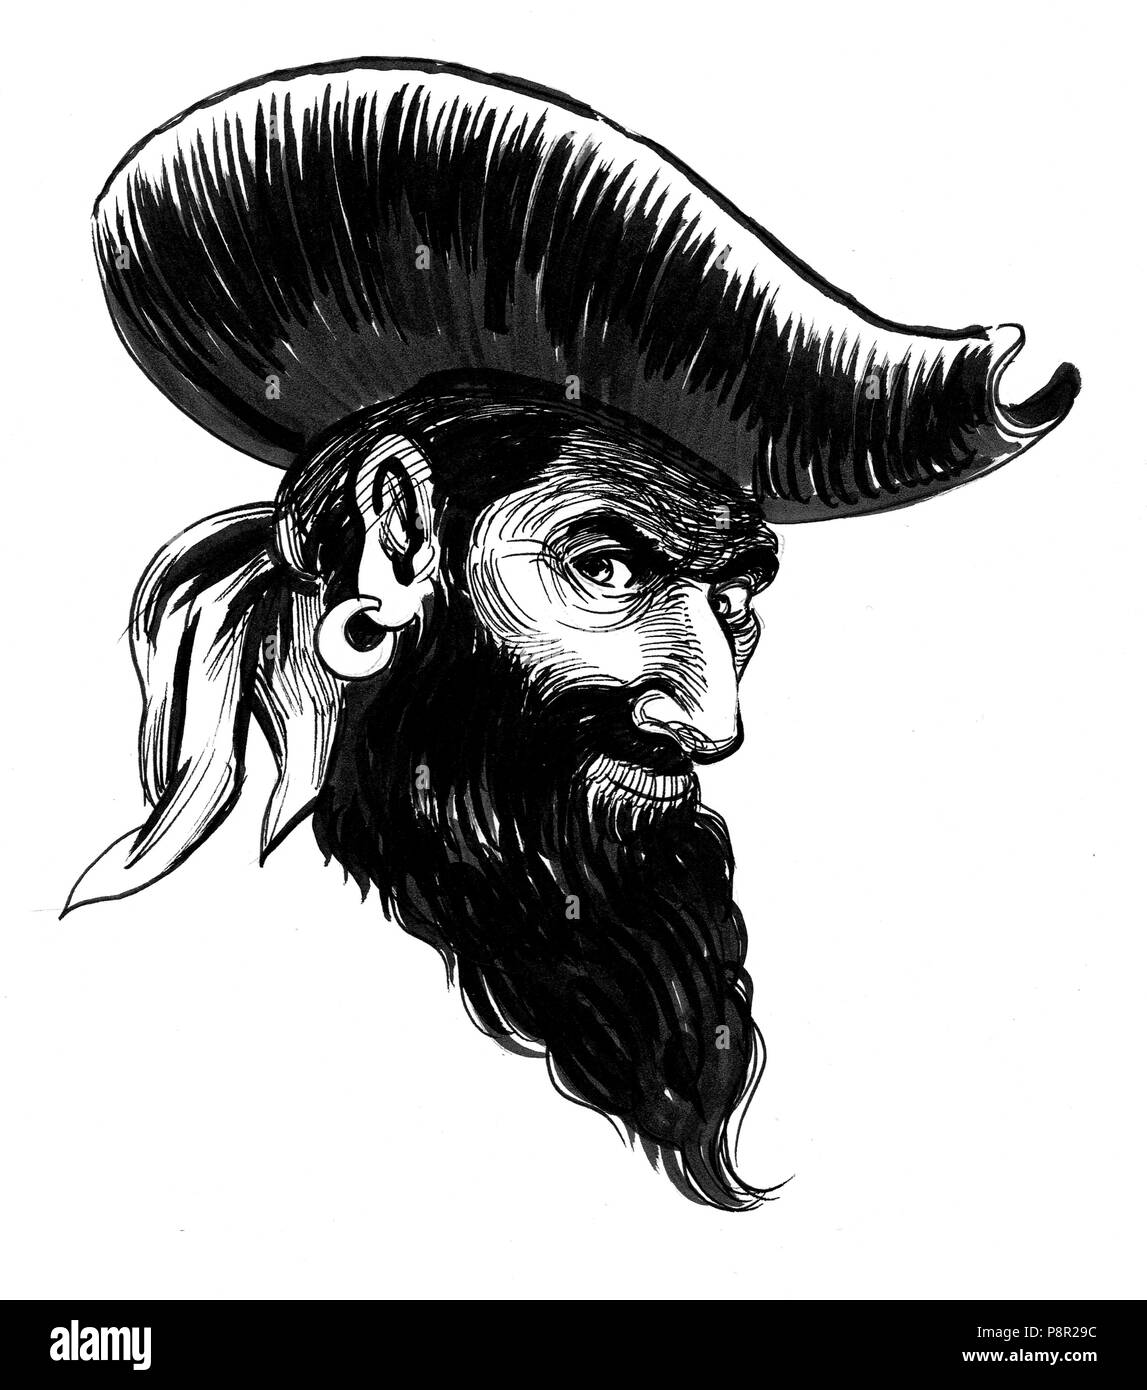 Pirate Captain In The Hat Ink Black And White Illustration Stock Photo Alamy